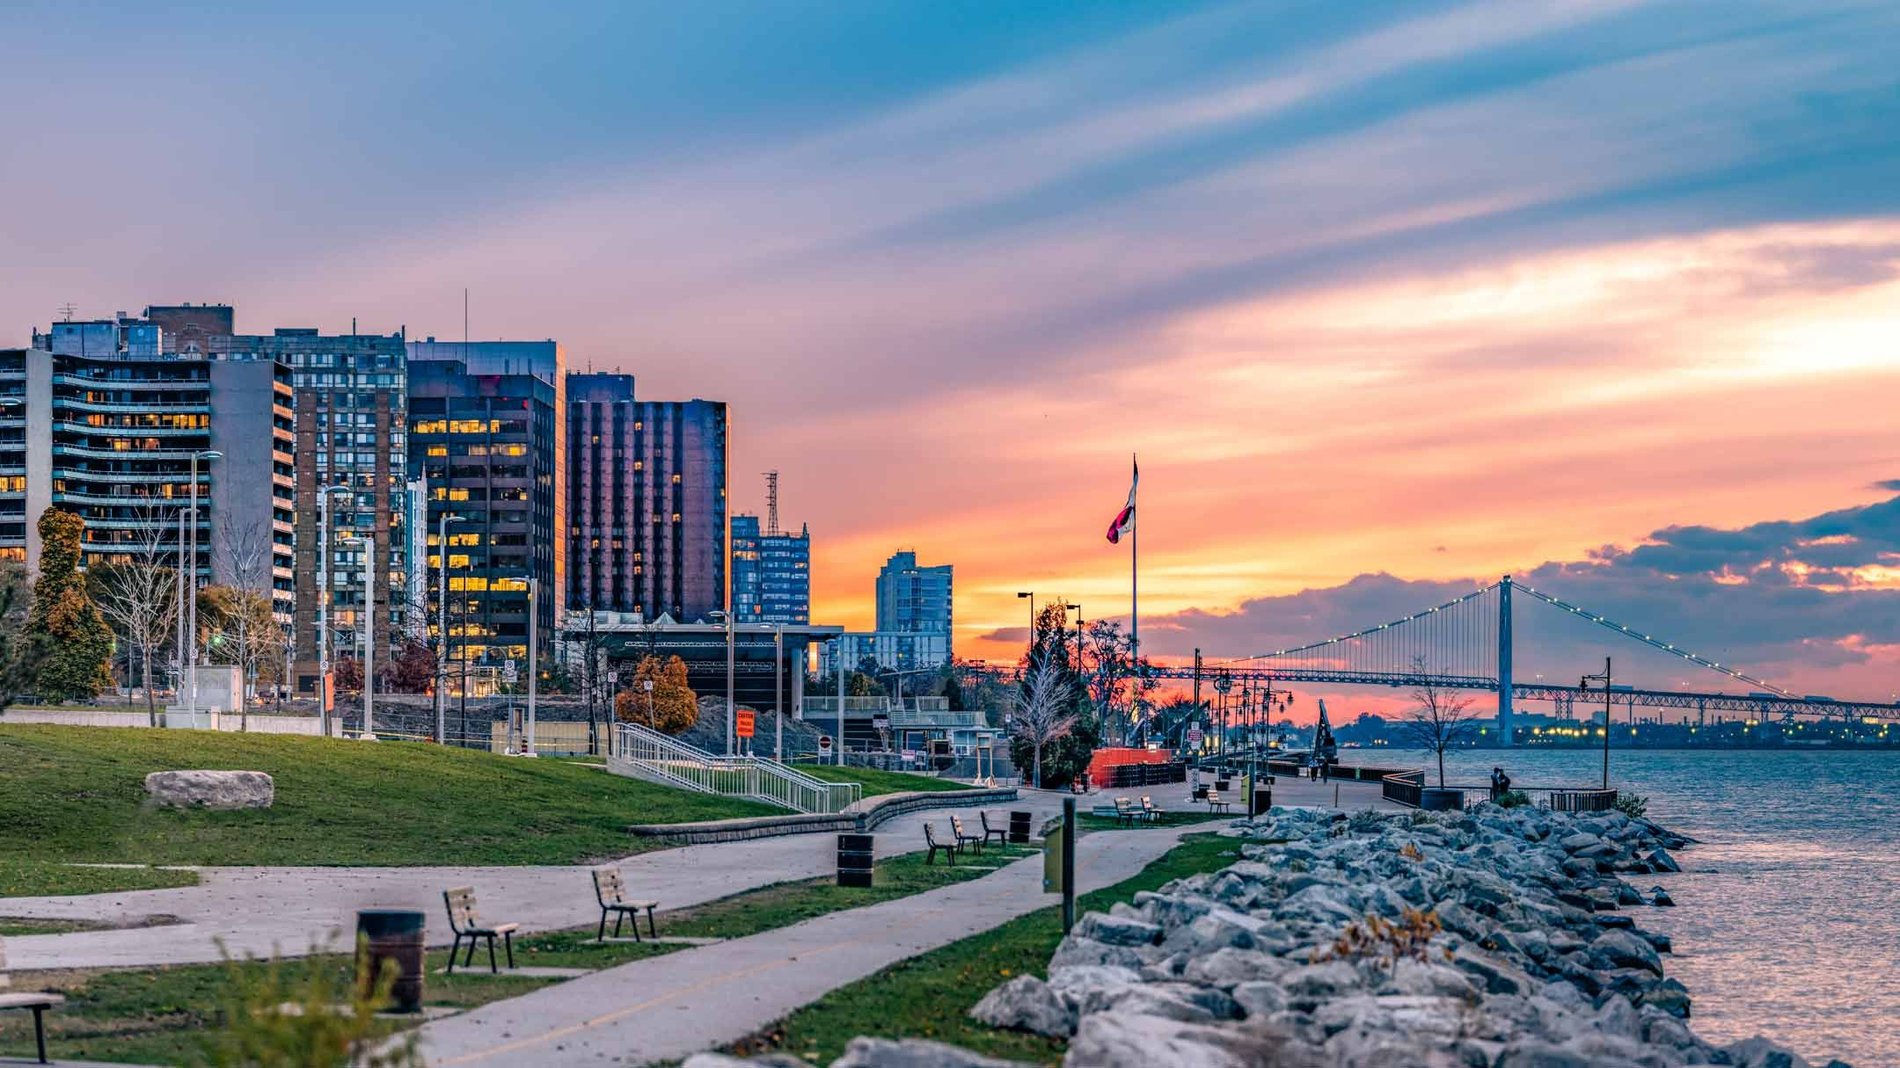 The waterfront of Windsor, Ontario during sunset